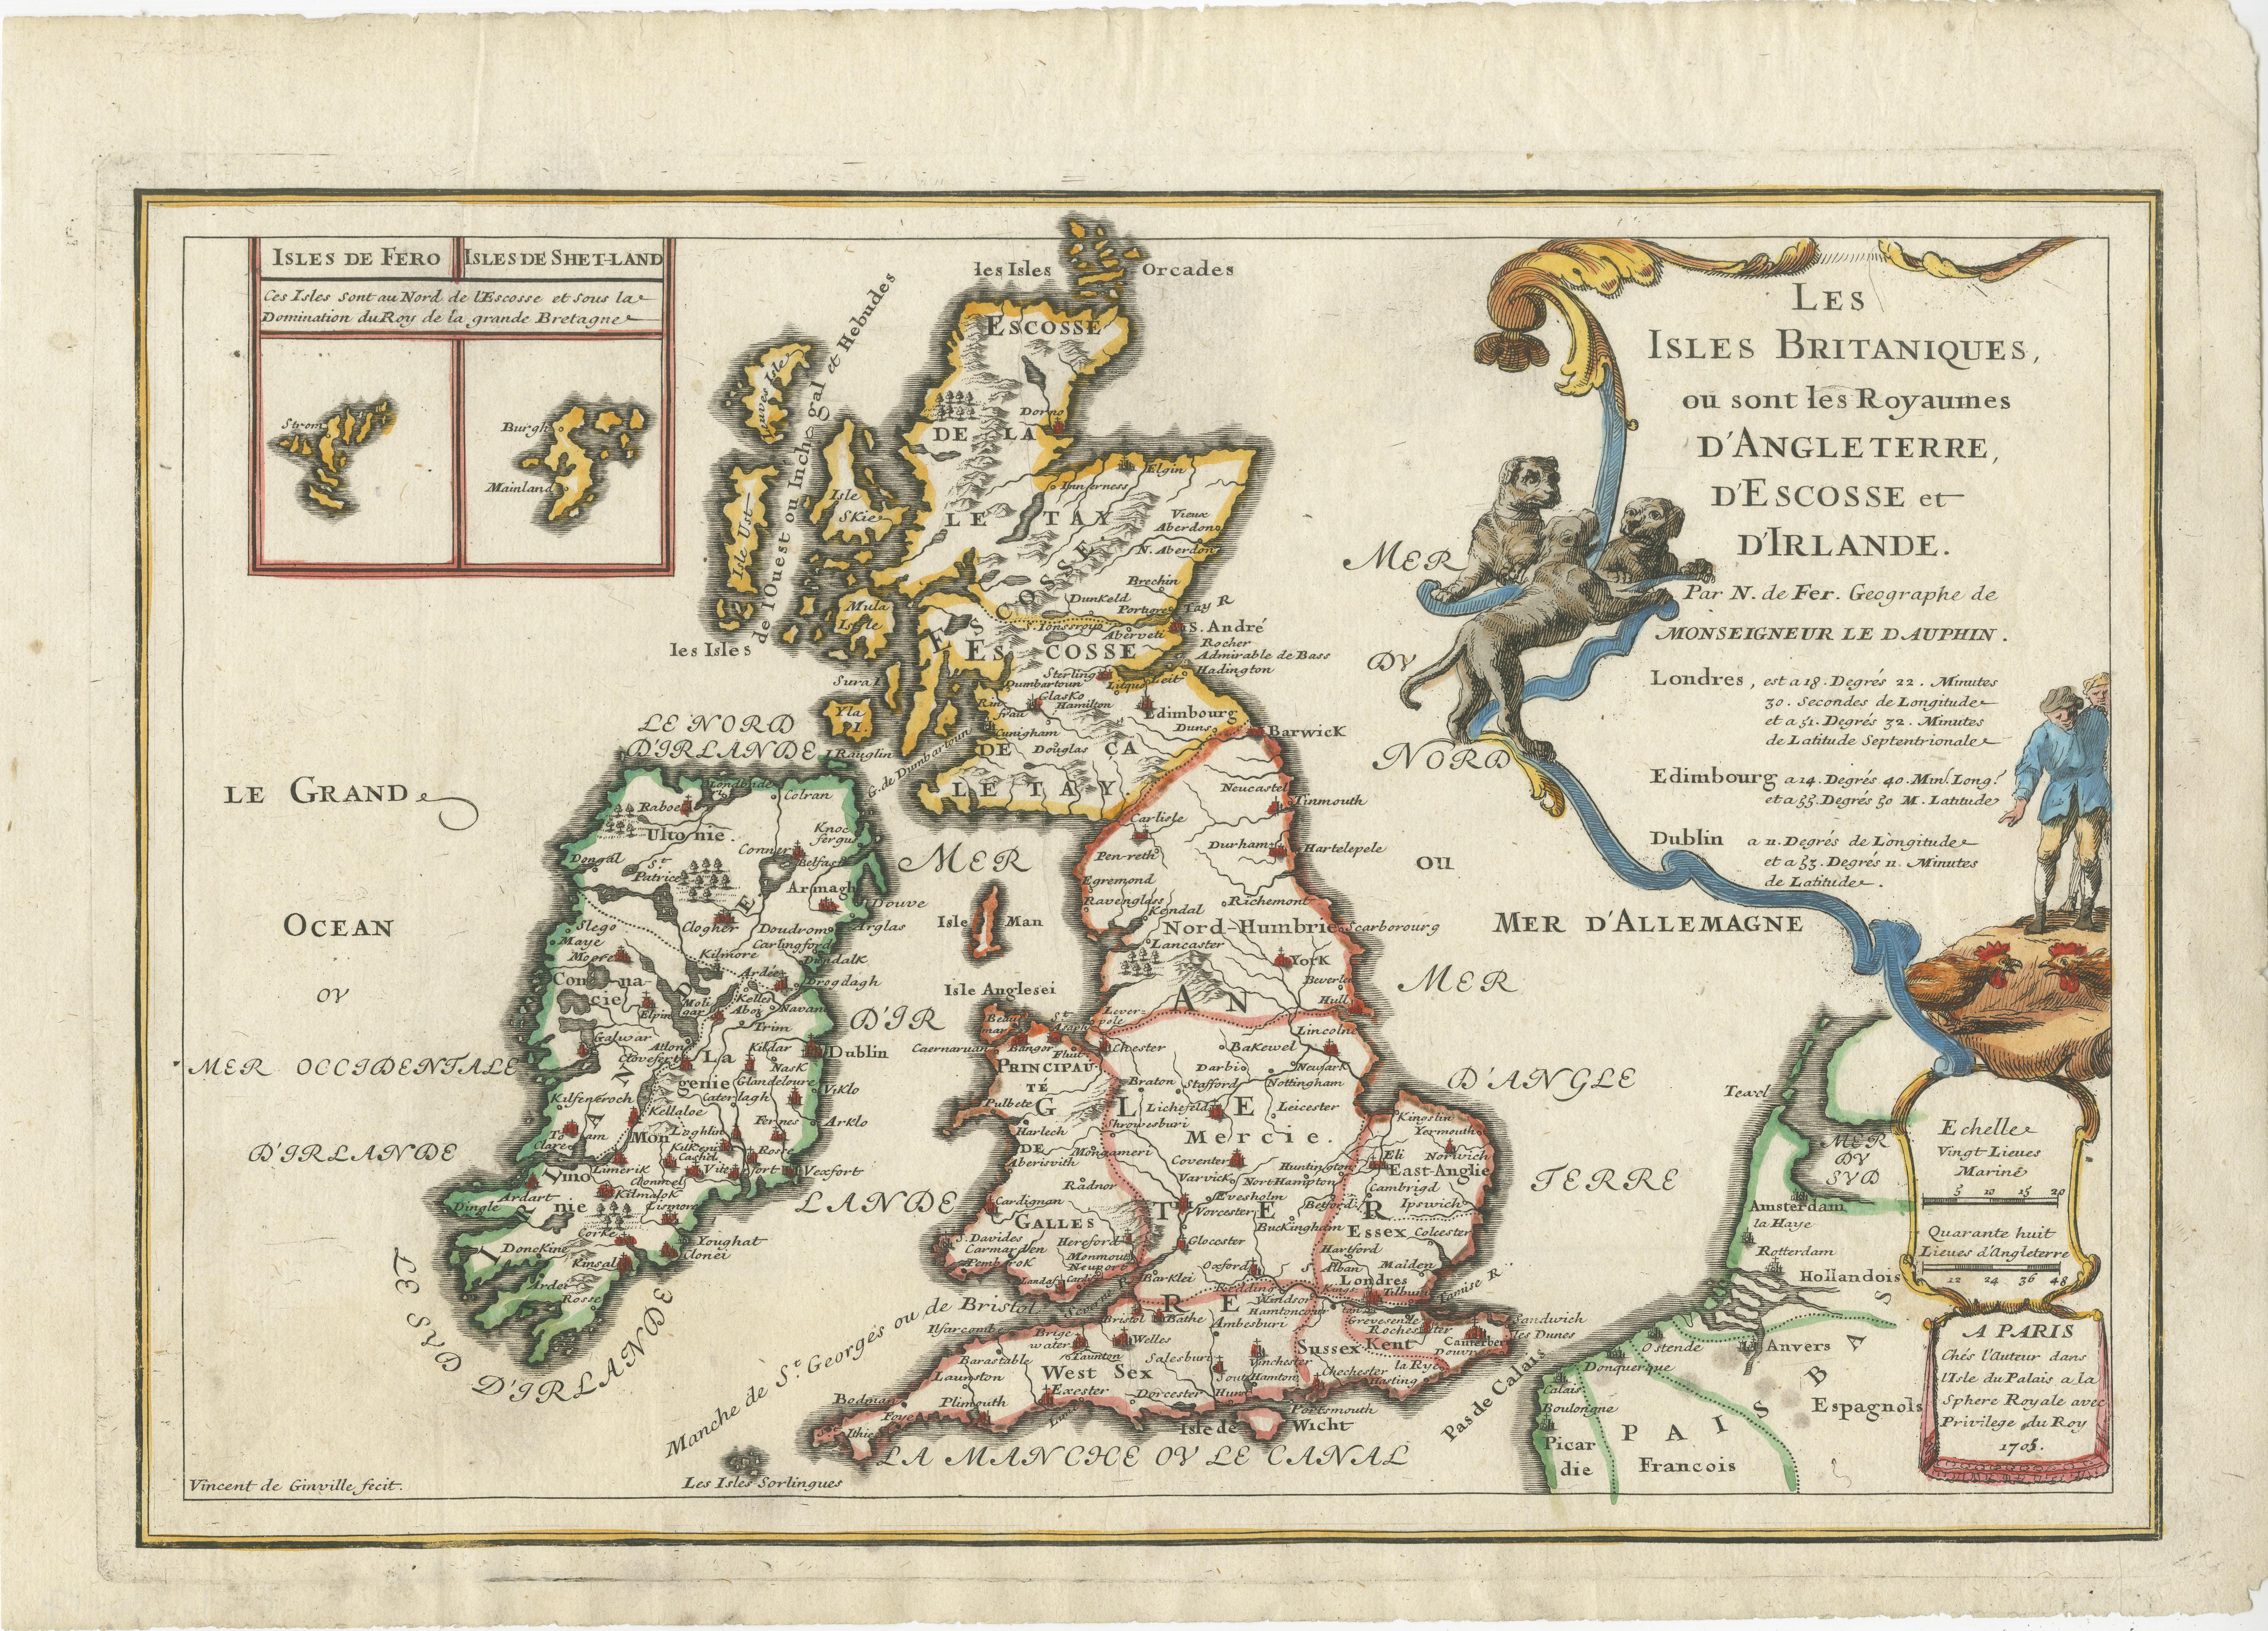 Antique map titled 'Les Isles Britaniques ou sont les Royaumes d'Angleterre (..)'. Original old map of the British Isles with inset maps of the Faroes and Shetlands. The title cartouche depicts dog-fighting and cock-fighting, the French perception